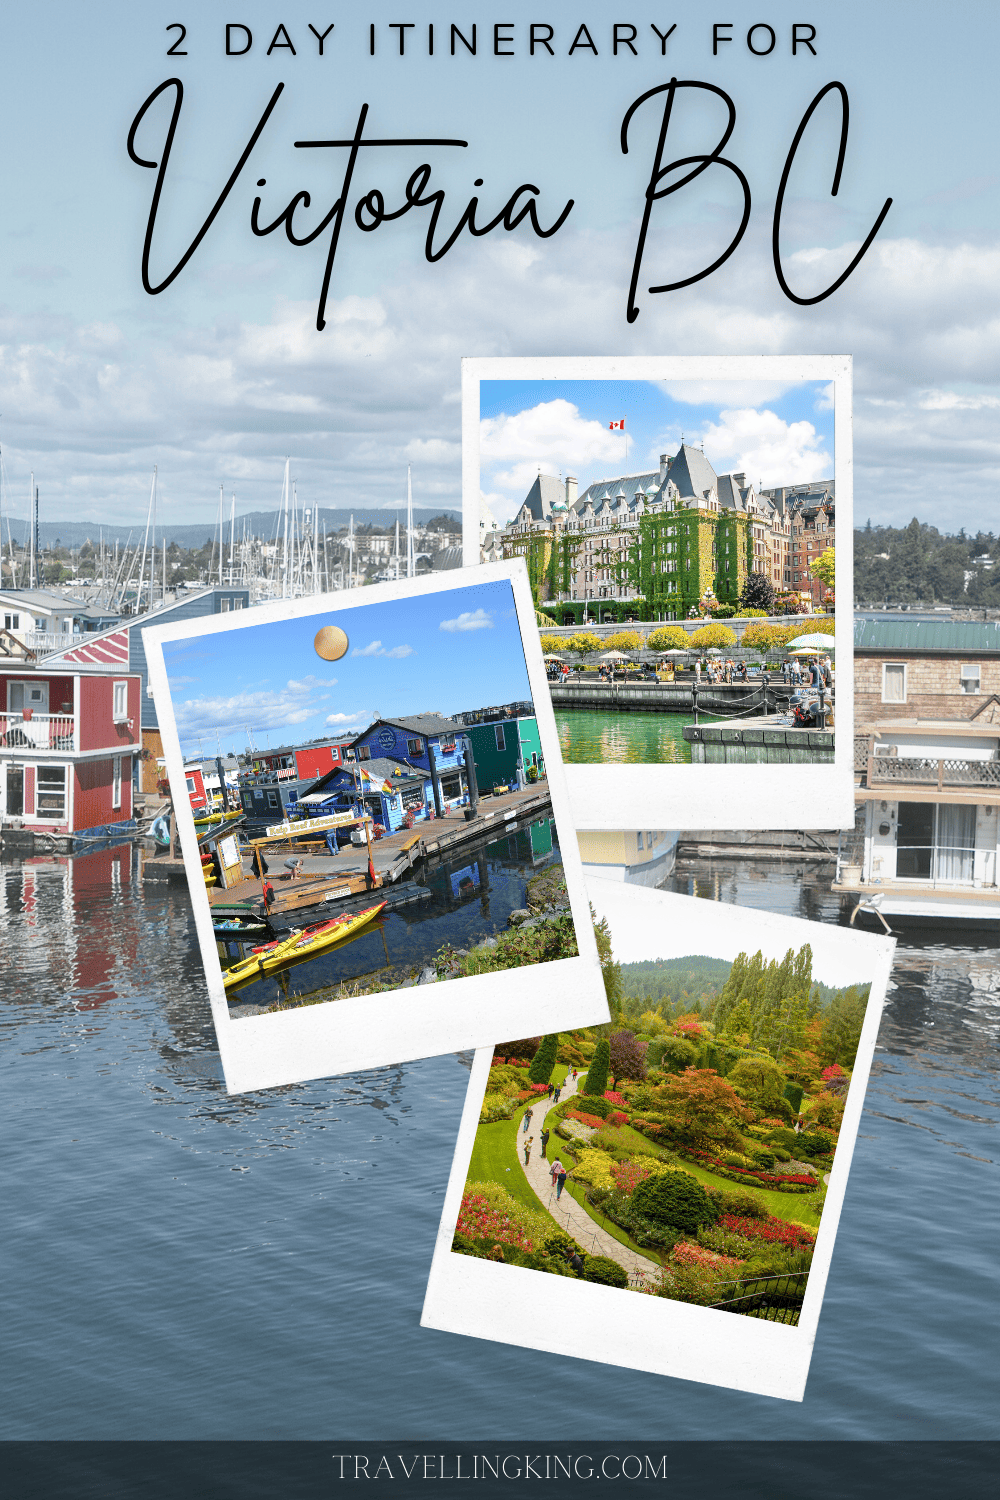 48 Hours in Victoria BC - 2 Day Itinerary 